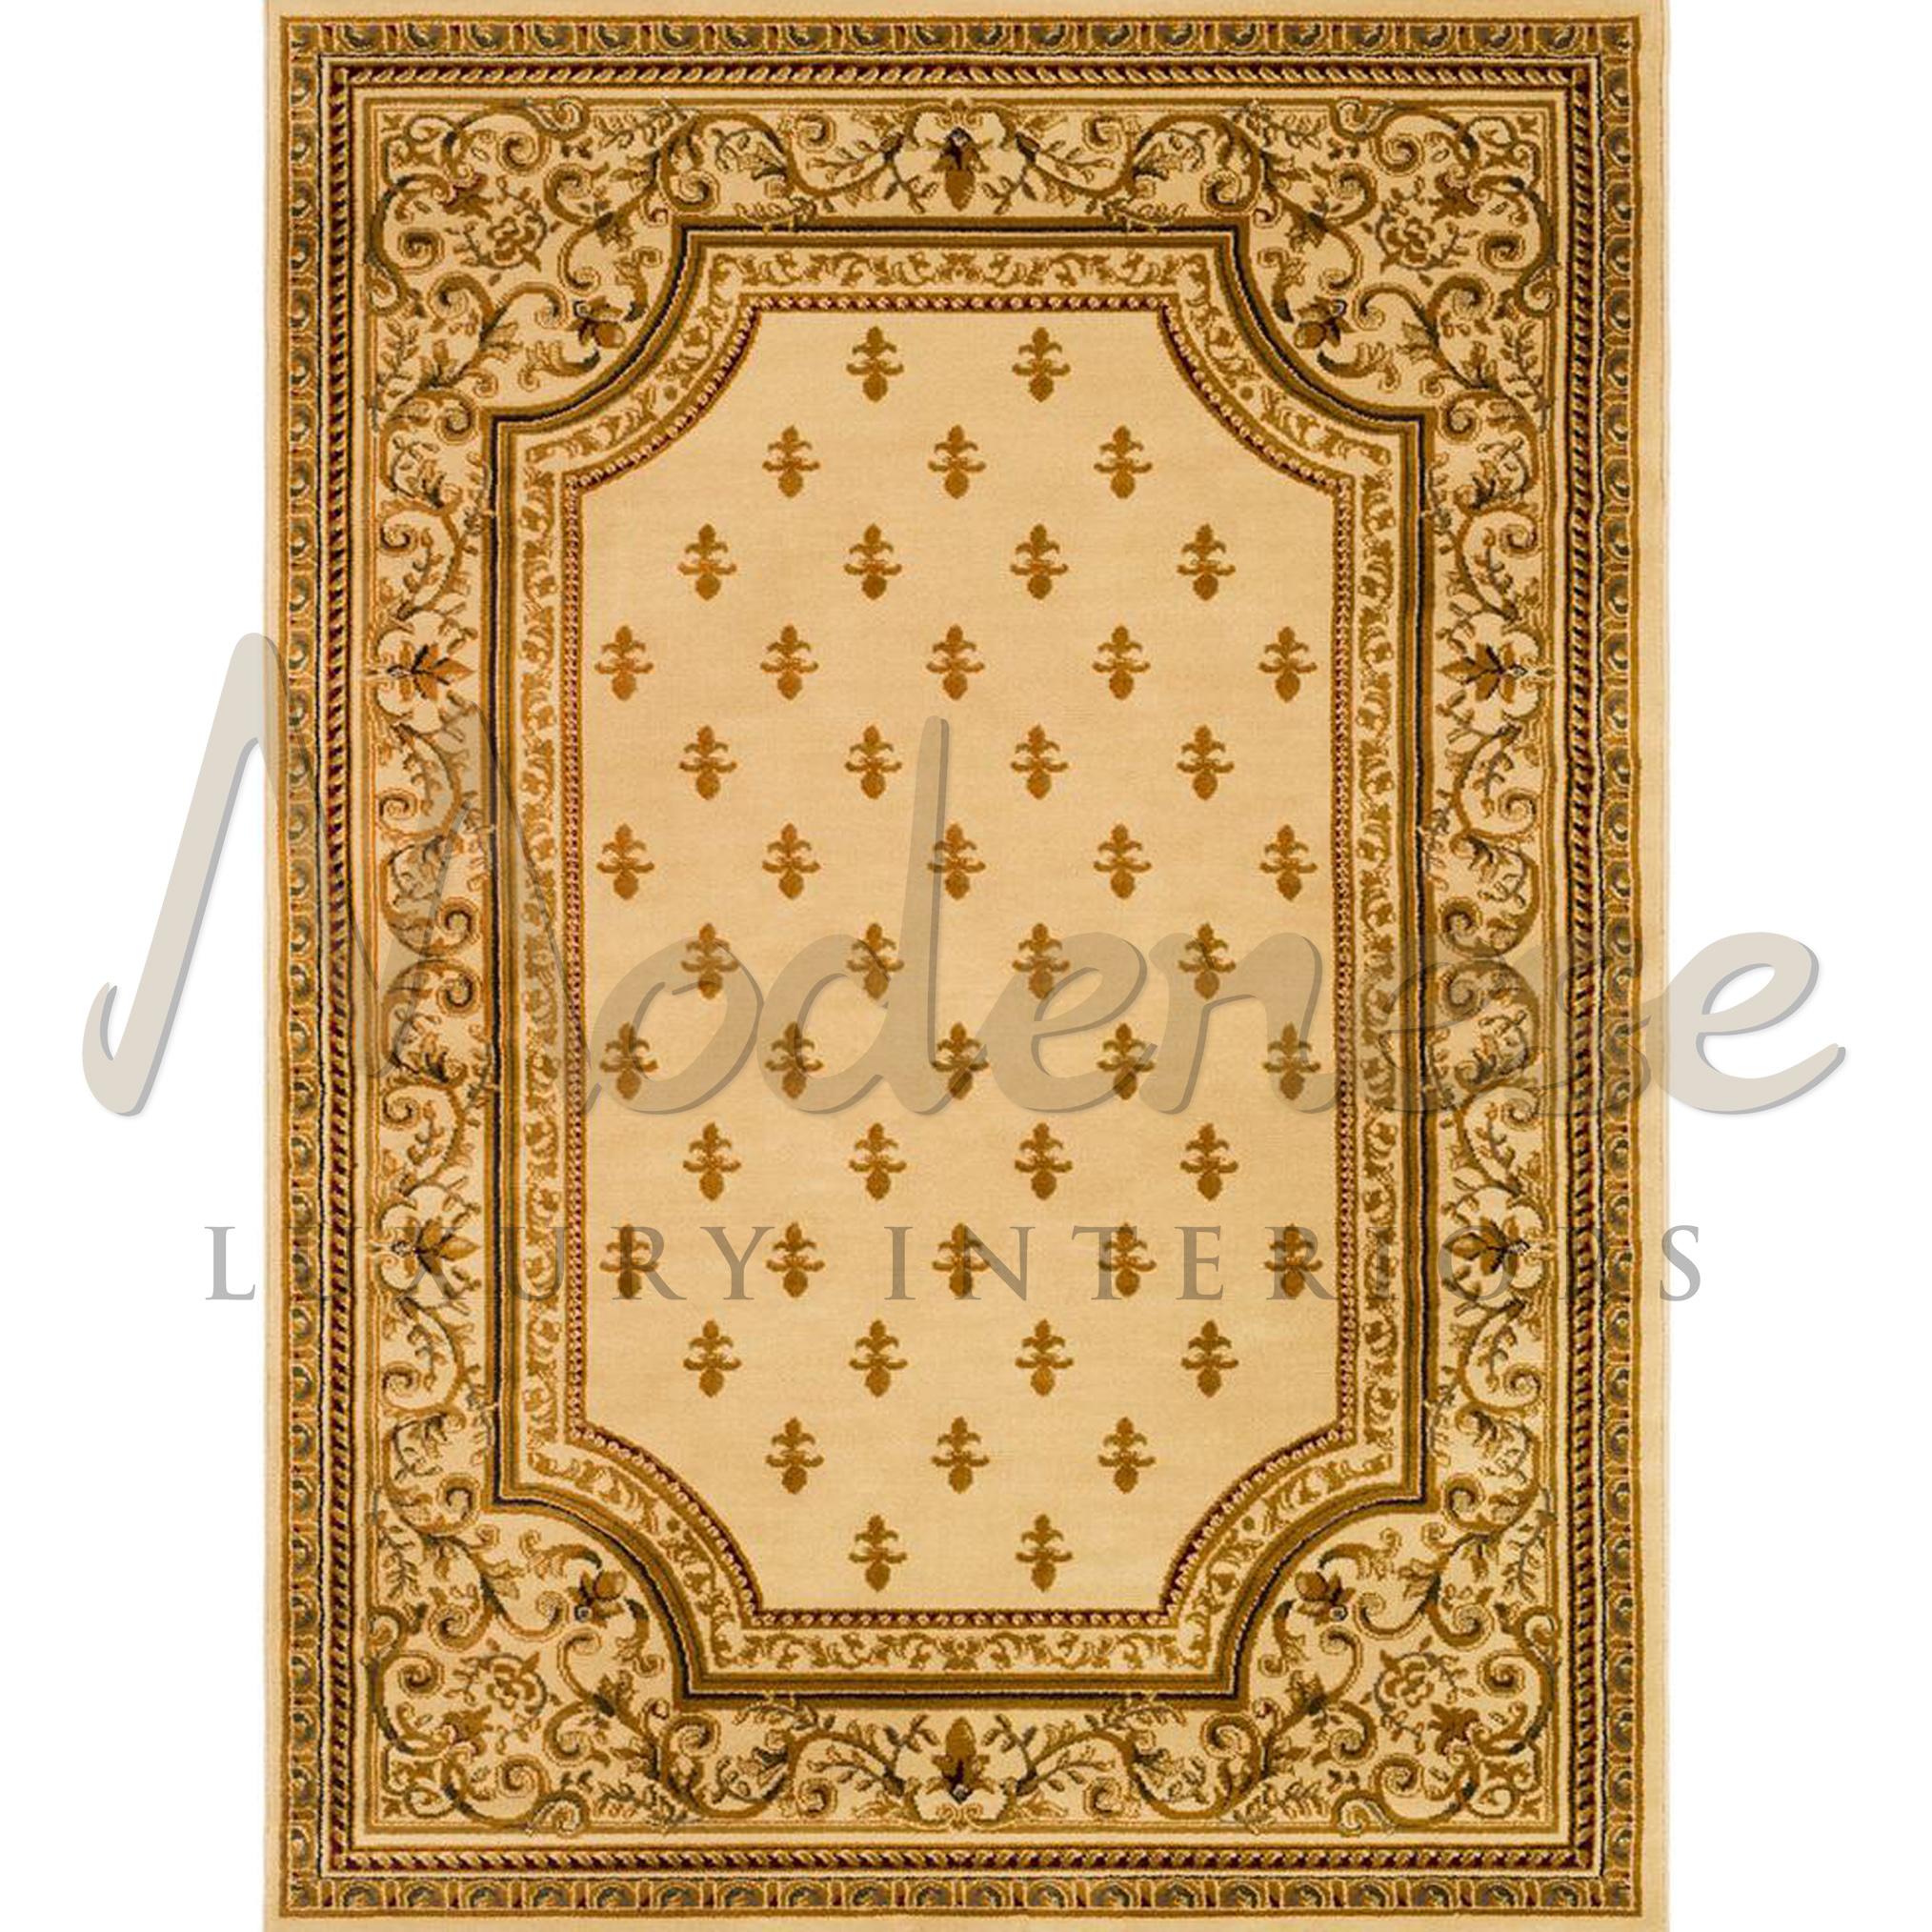 100% bamboo silk carpet with emerald background and intricate floreal details and gold lily pattern, top quality low pile fibers. Modenese Interiors artisans preciously handbraided this fancy colorized vintage carpet for a VIP penthouse interior